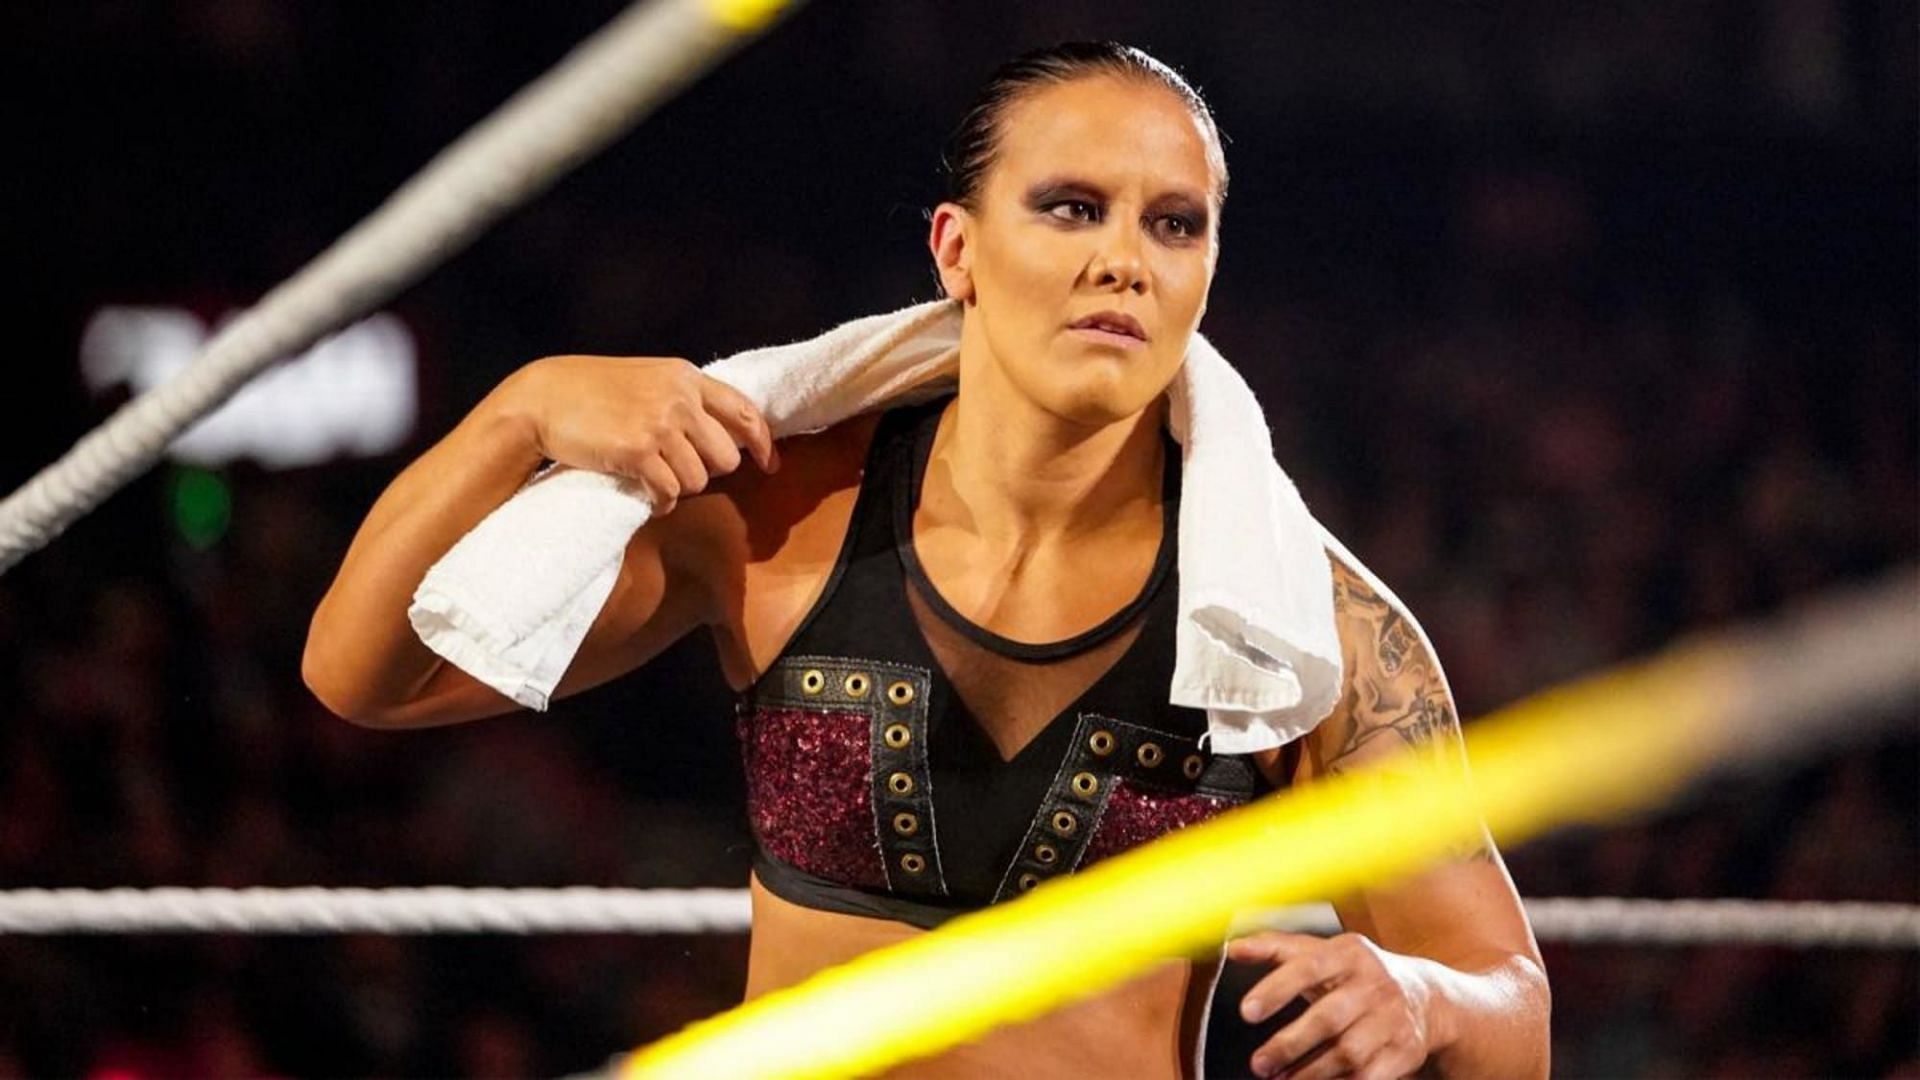 Shayna Baszler has a title match of her own this weekend.